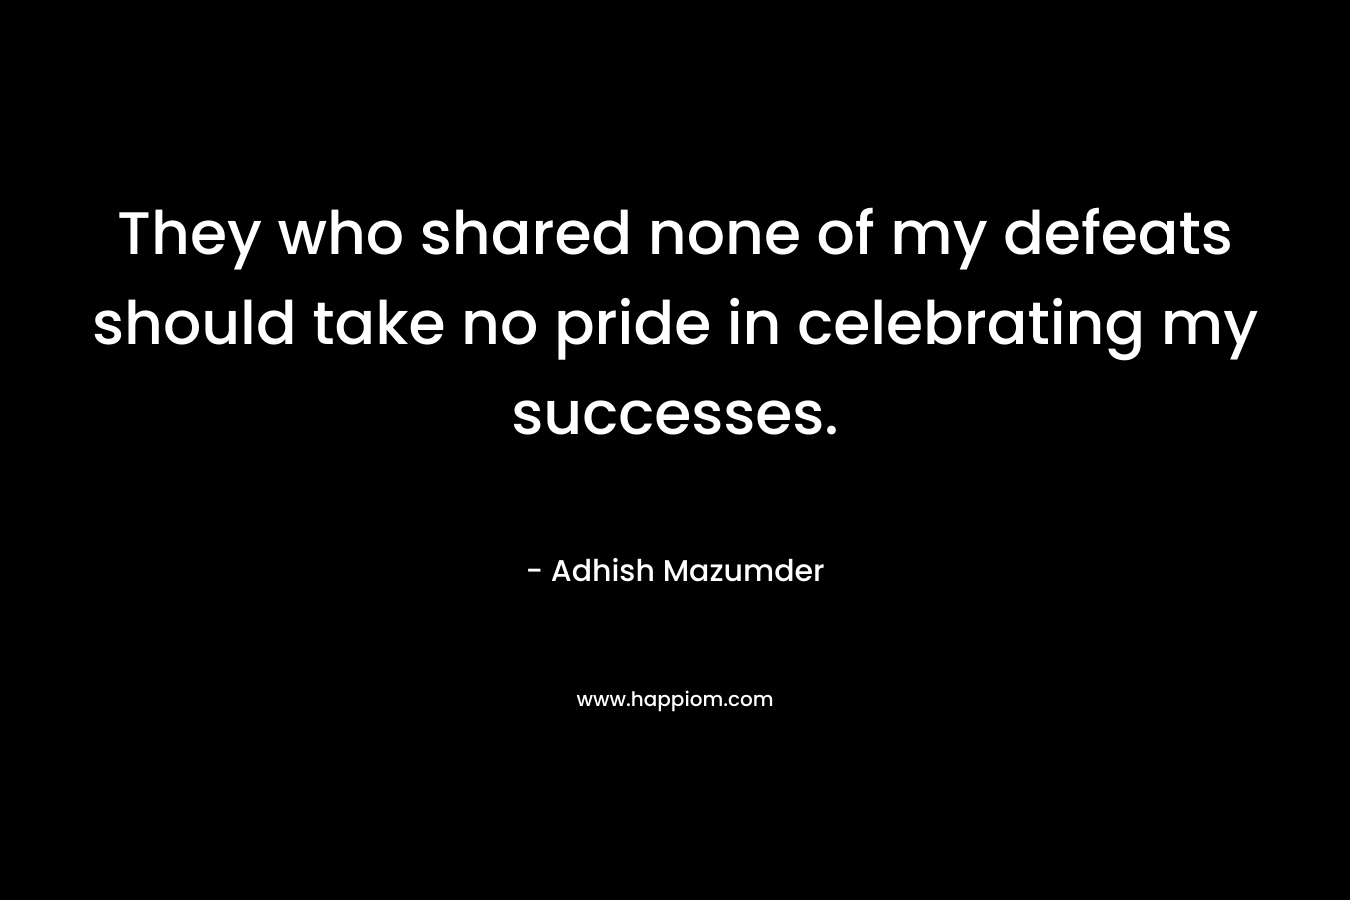 They who shared none of my defeats should take no pride in celebrating my successes. – Adhish Mazumder